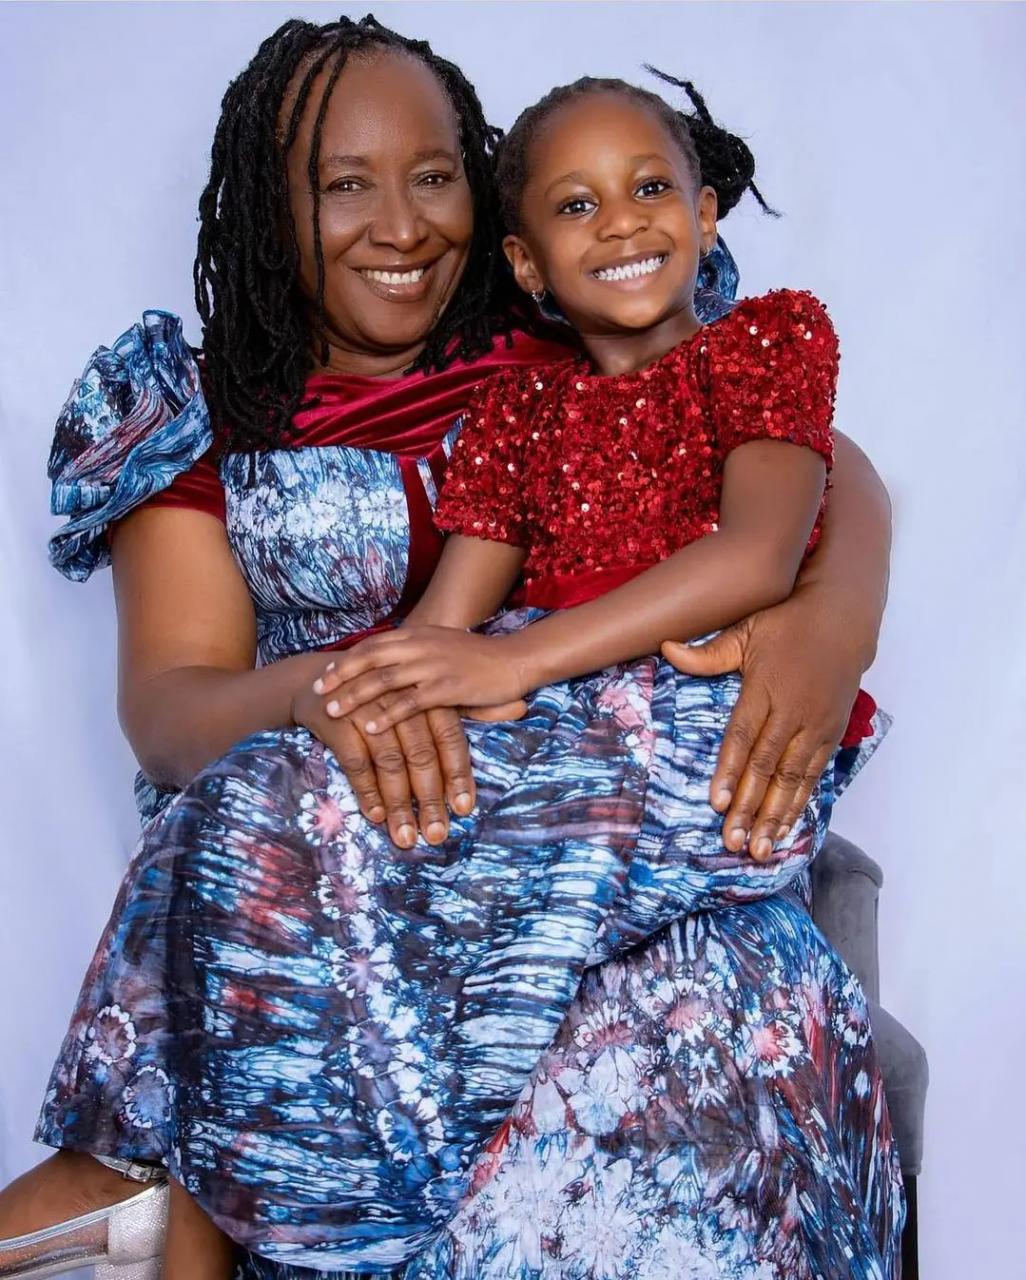 Patience Ozokwo celebrates her birthday with lovely new photo